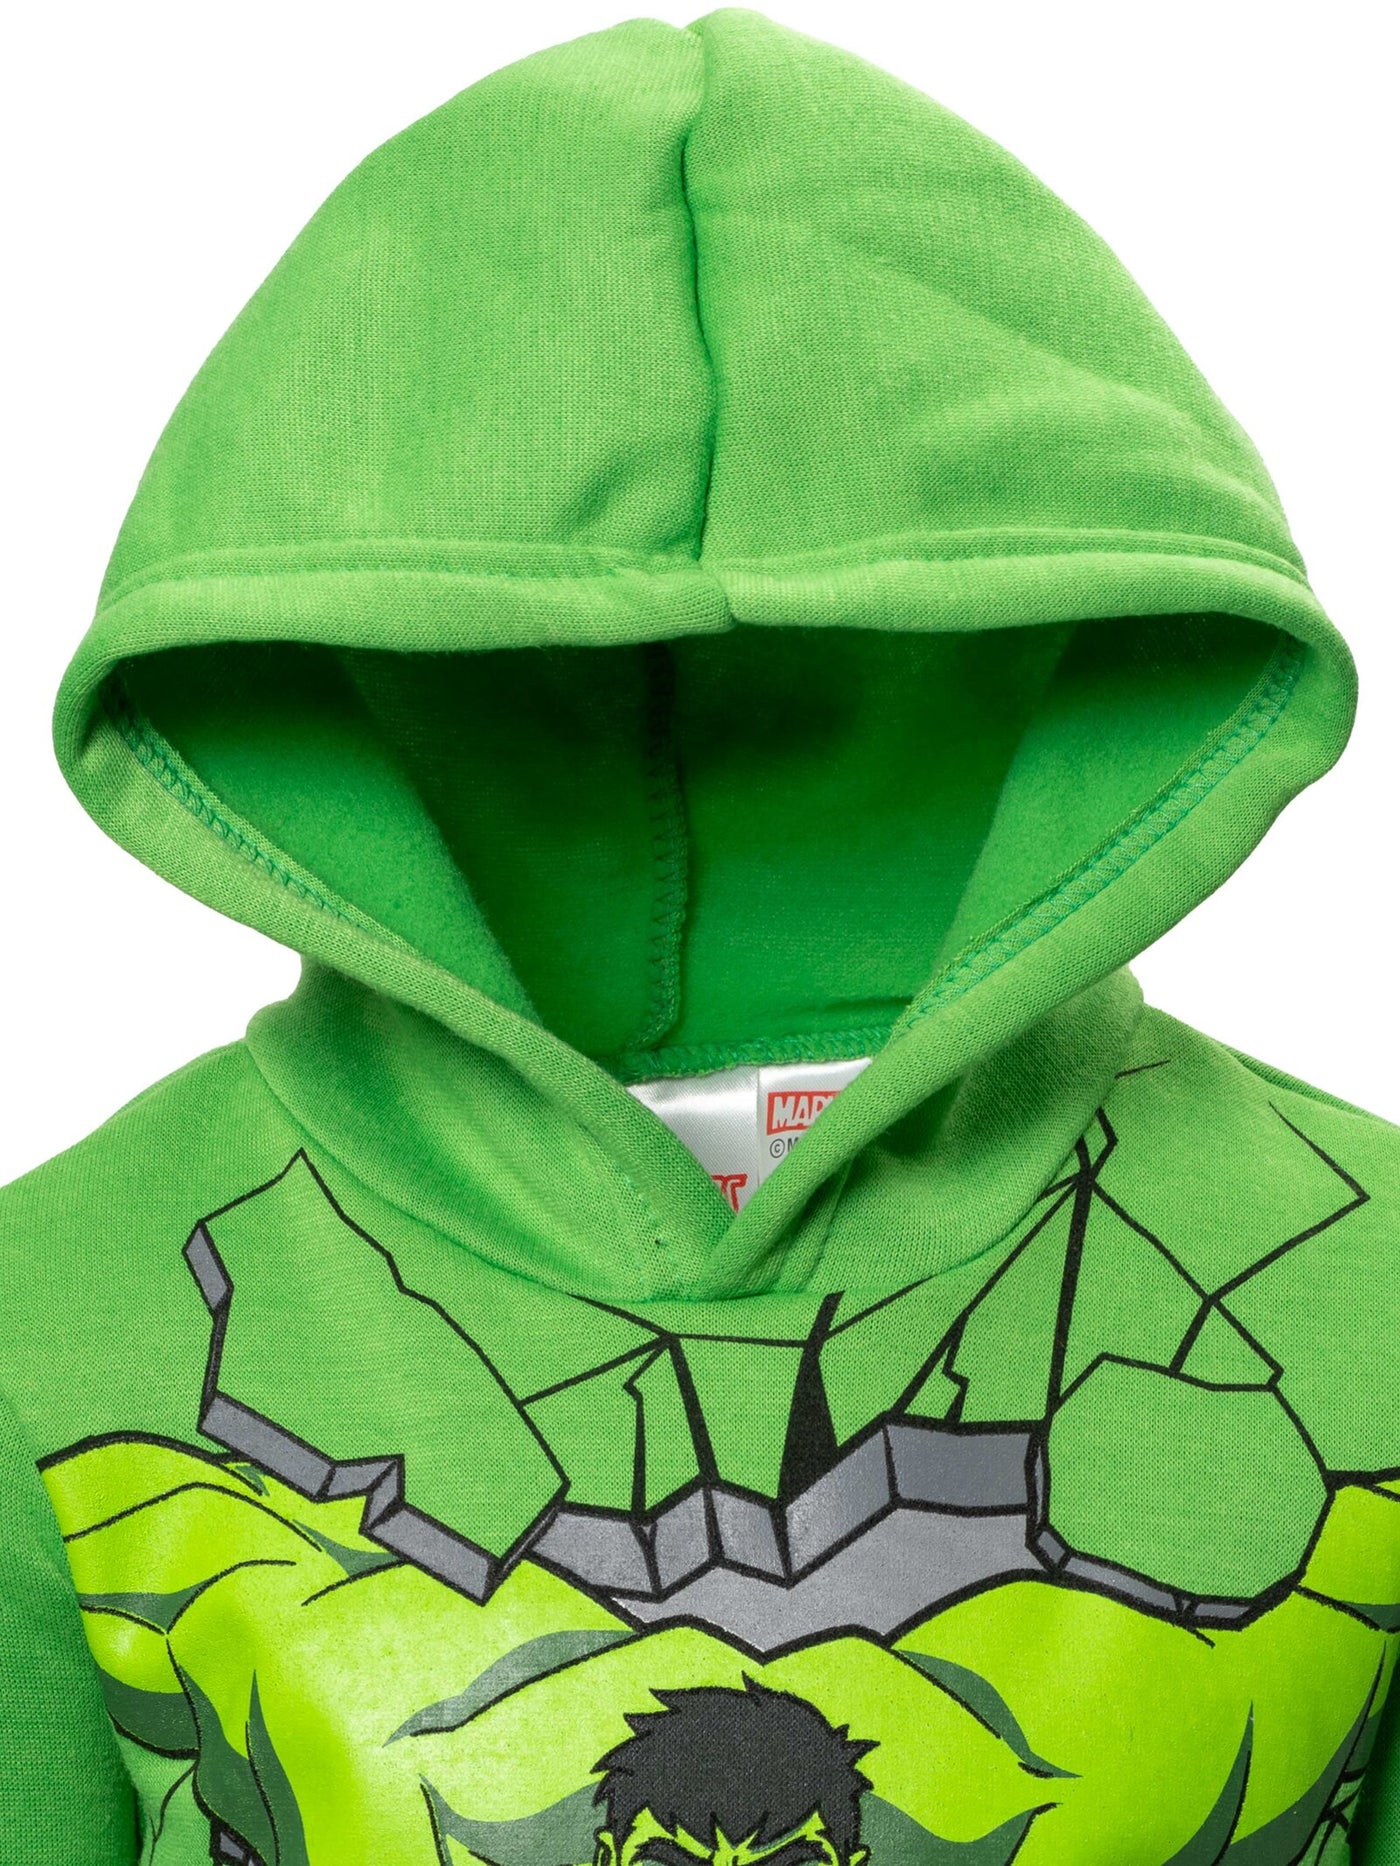 Marvel Avengers The Hulk Fleece Pullover Hoodie and Pants Outfit Set